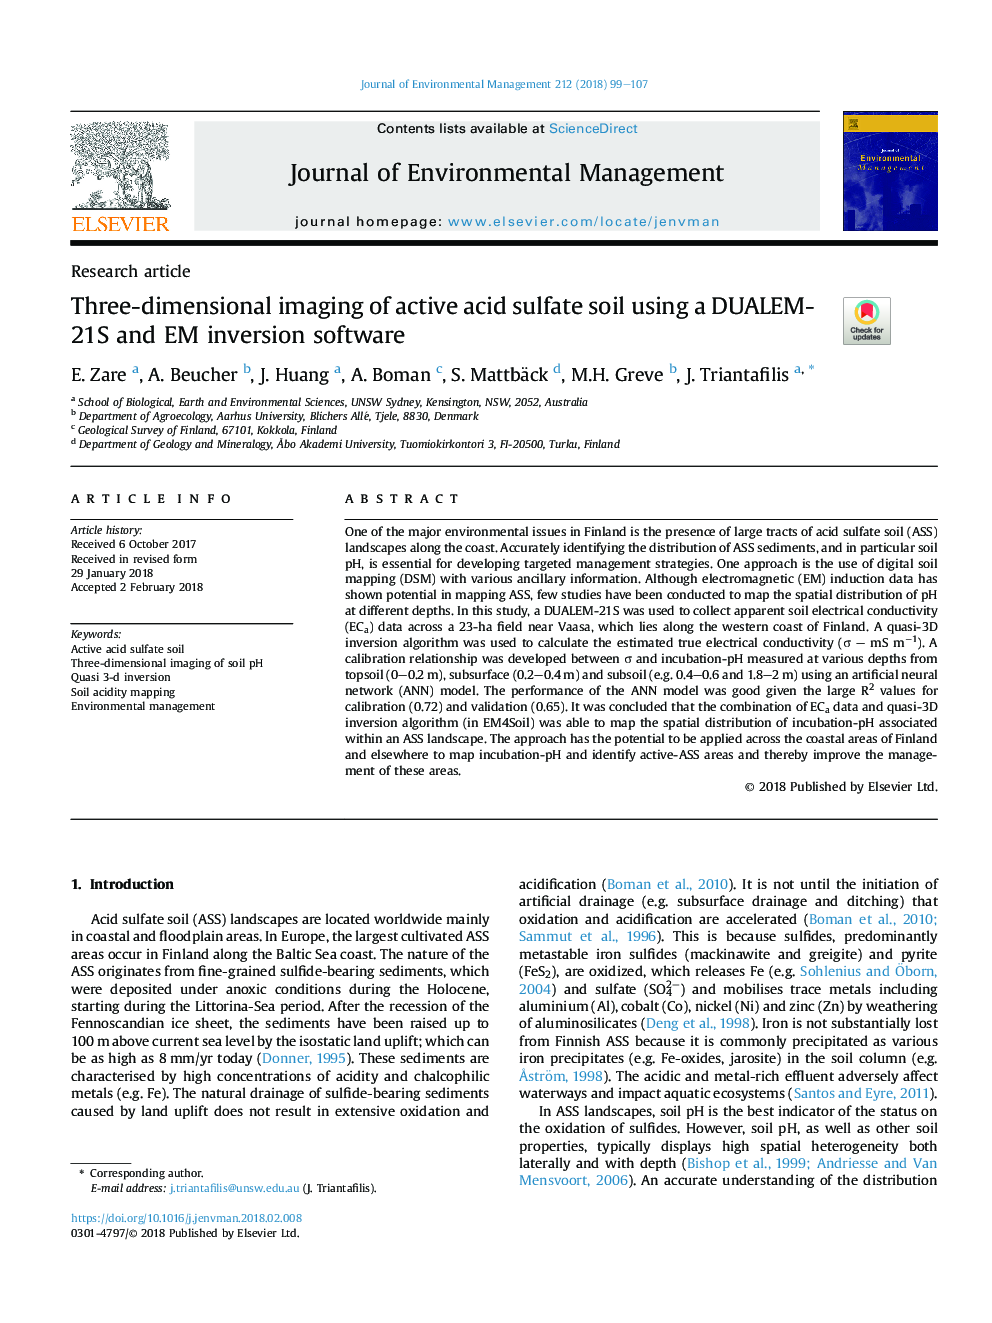 Three-dimensional imaging of active acid sulfate soil using a DUALEM-21S and EM inversion software